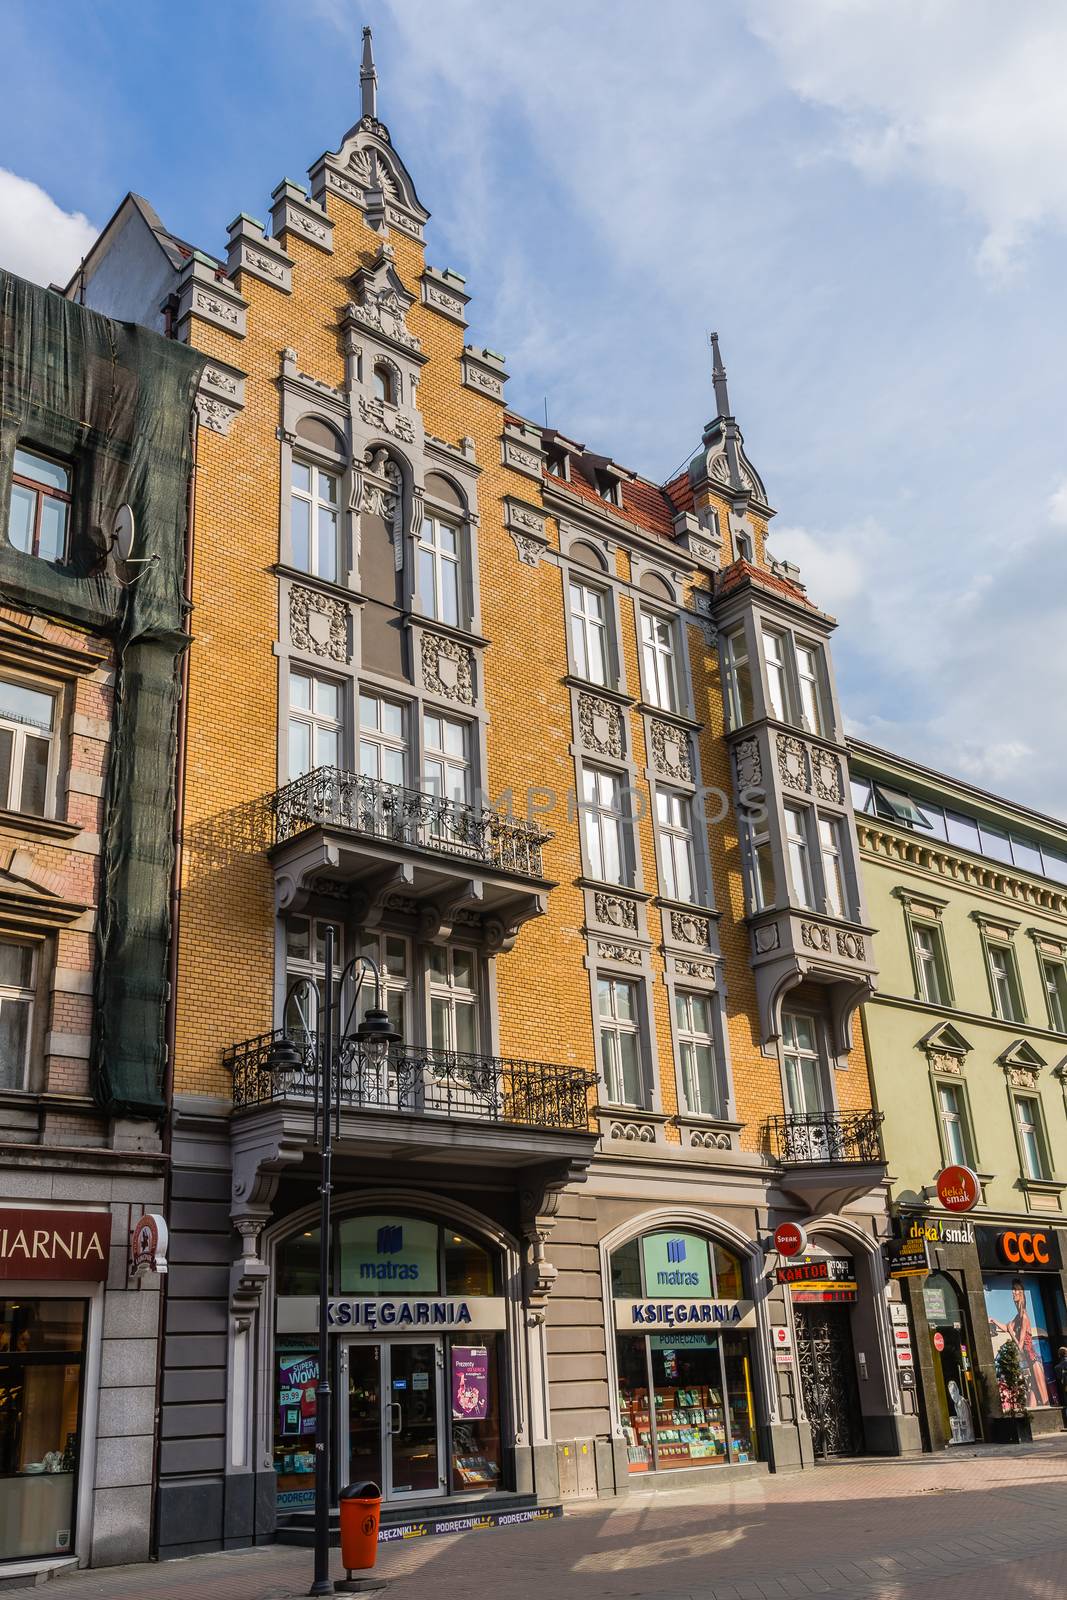 Ancient tenement at Stawowa street in the very downtown of Katowice. Built in 1896 in the style of Historicism, designed by Ignatz Grunfeld, German architect of Jewish origin.